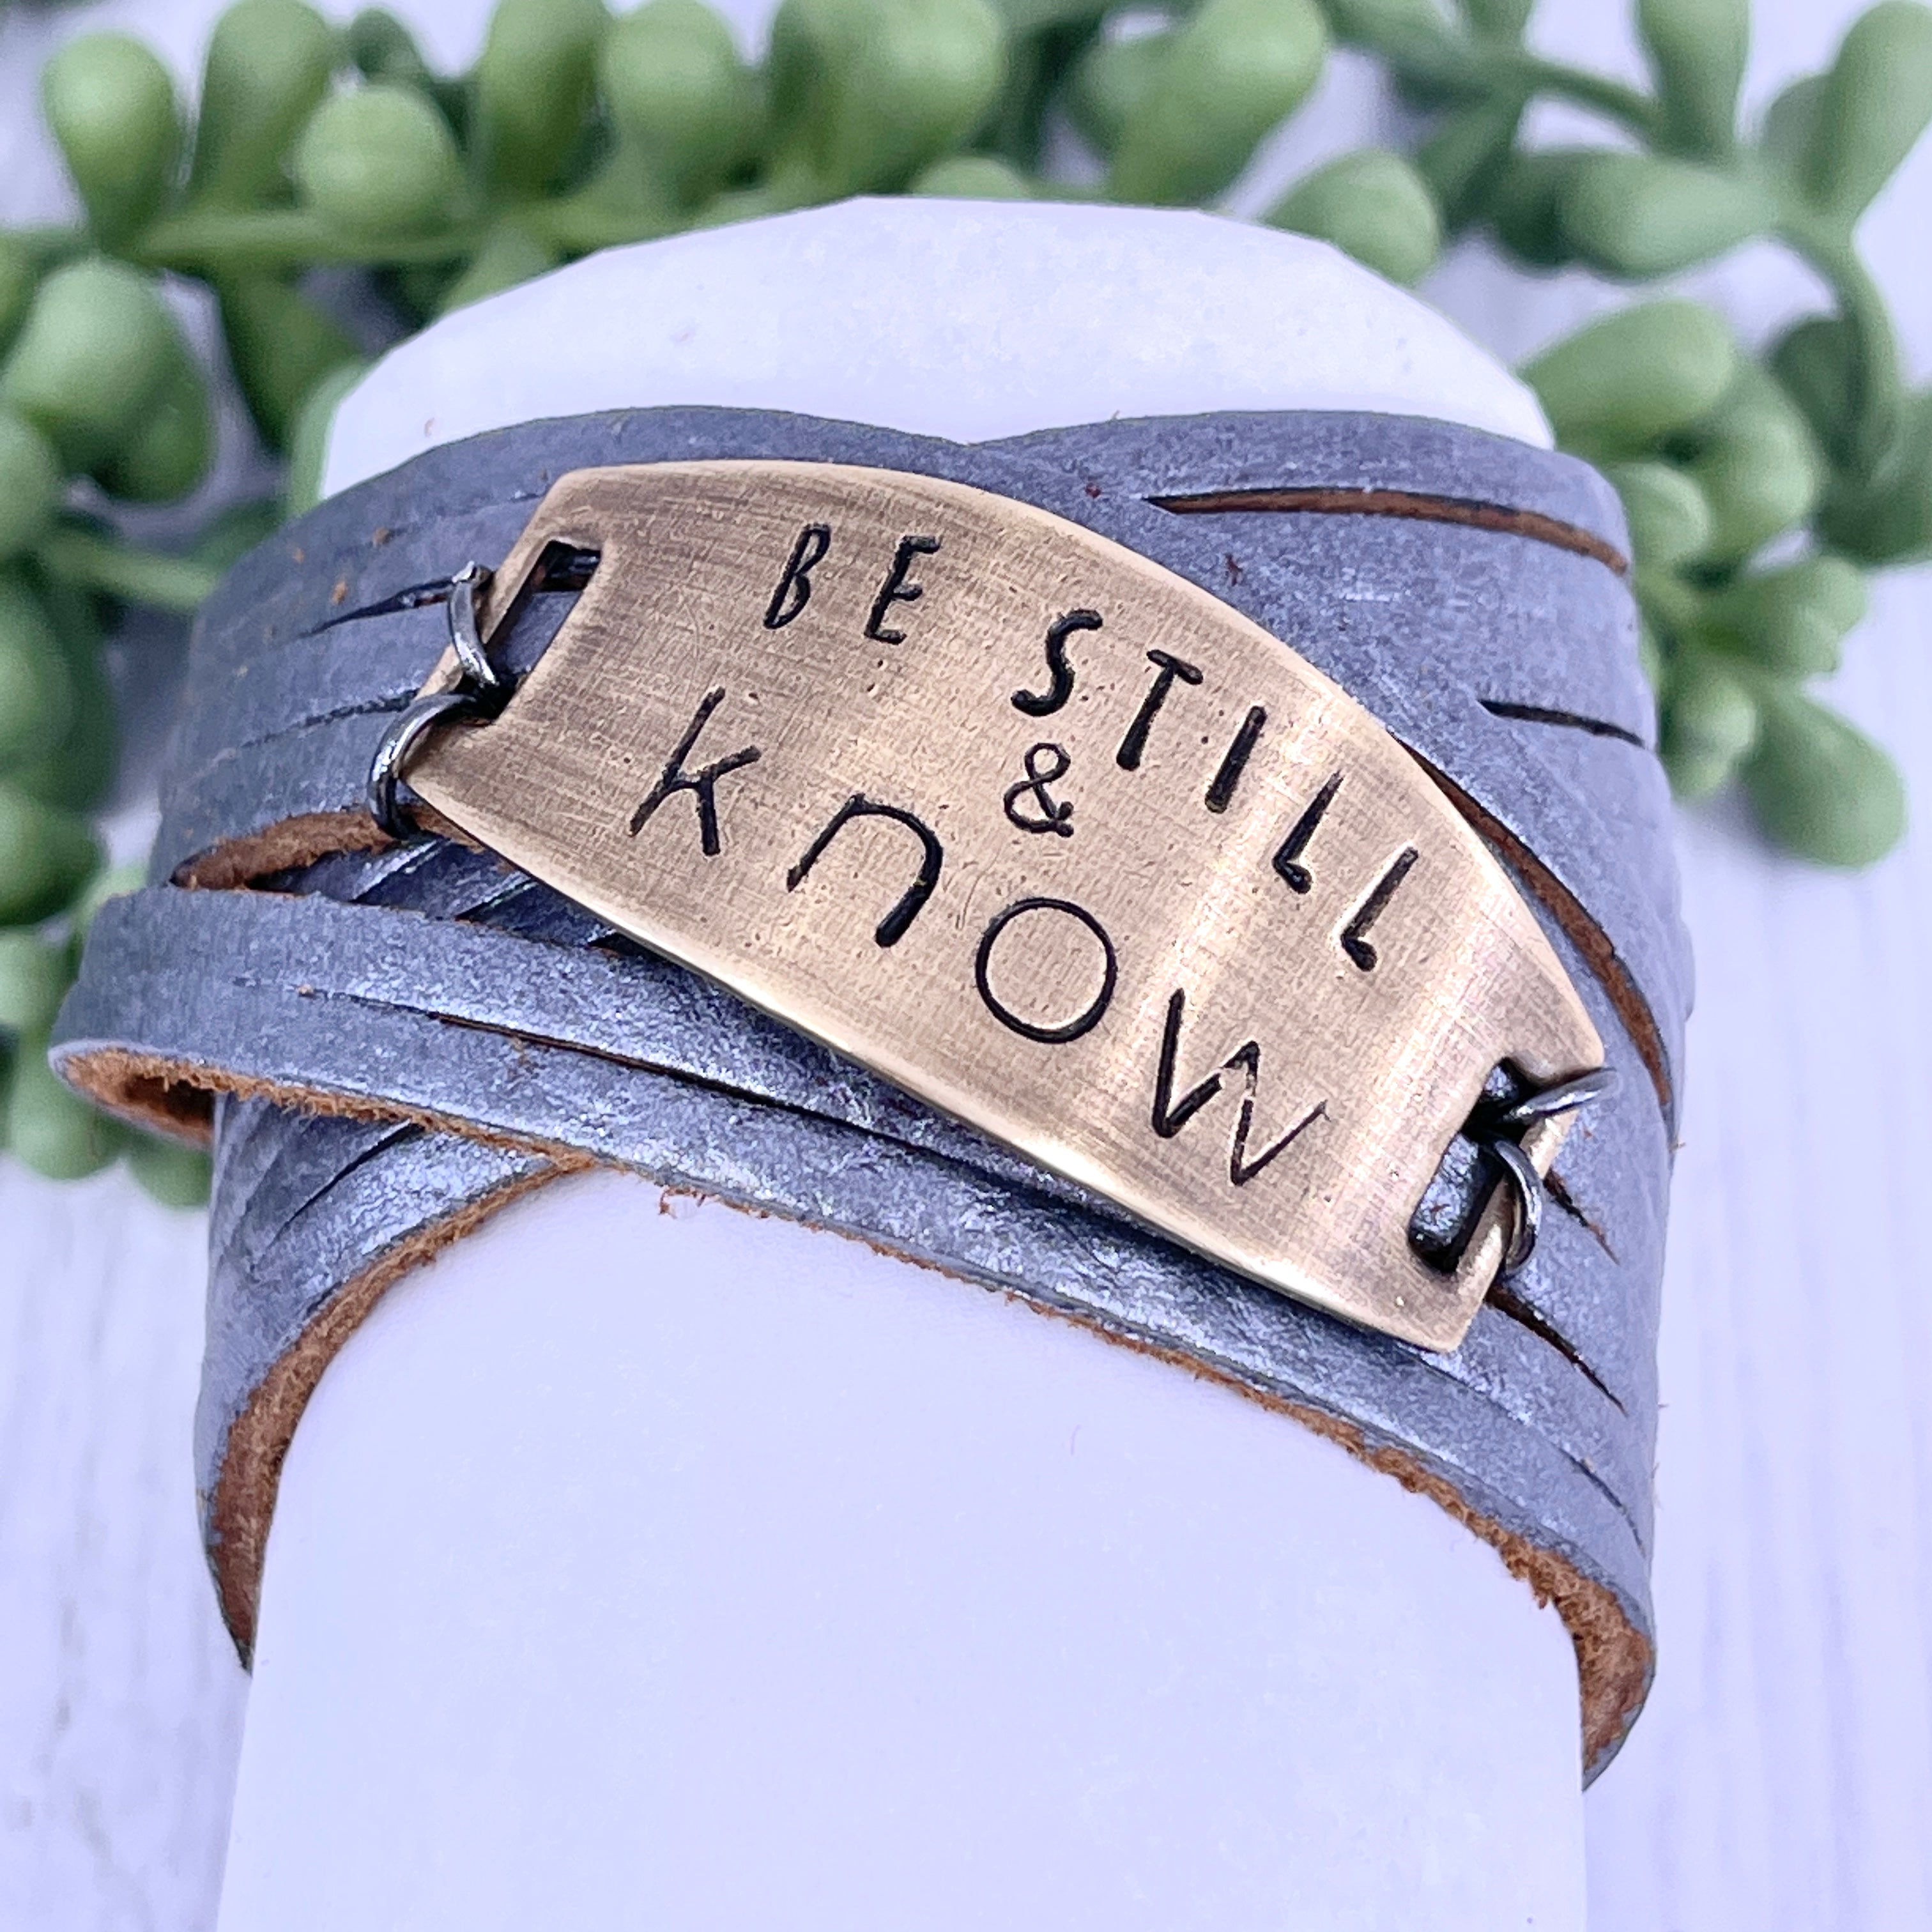 Adjustable Pewter Leather BE STILL & KNOW Wrap & Bronze Shield Bracelet, adjustable Leather Wrap Create Hope Cuffs 